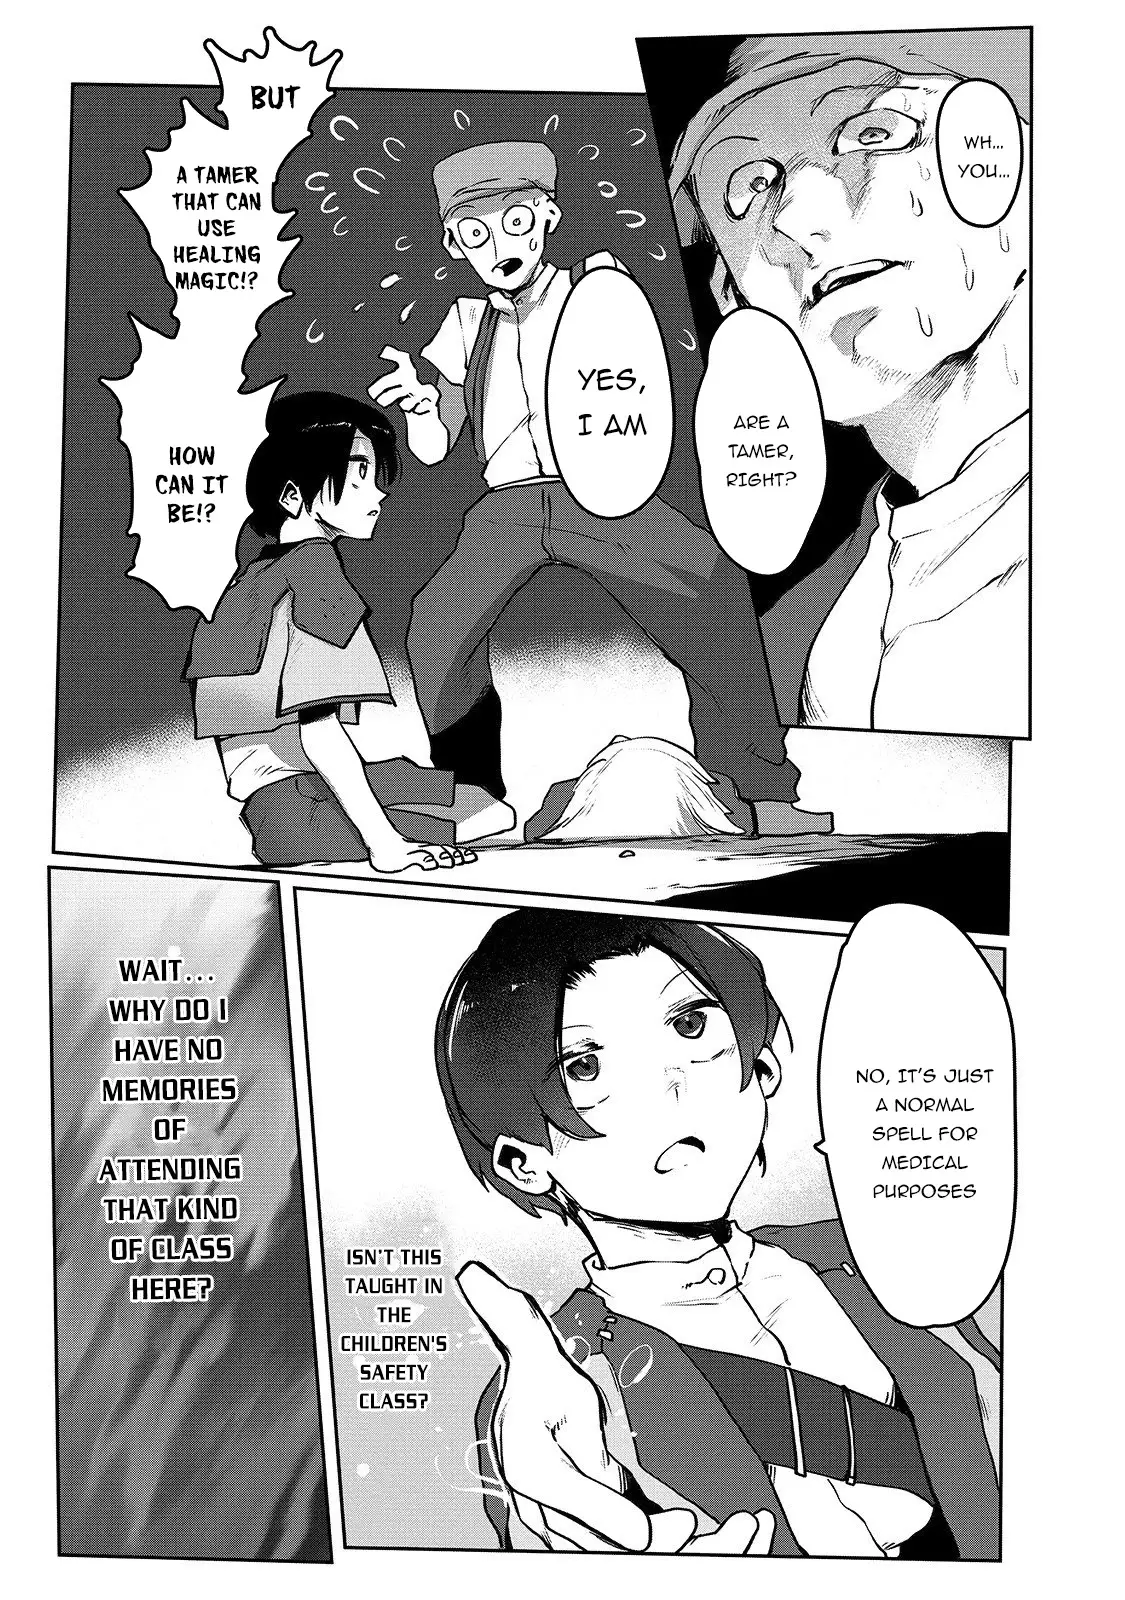 The Useless Tamer Will Turn Into The Top Unconsciously By My Previous Life Knowledge - 2 page 22